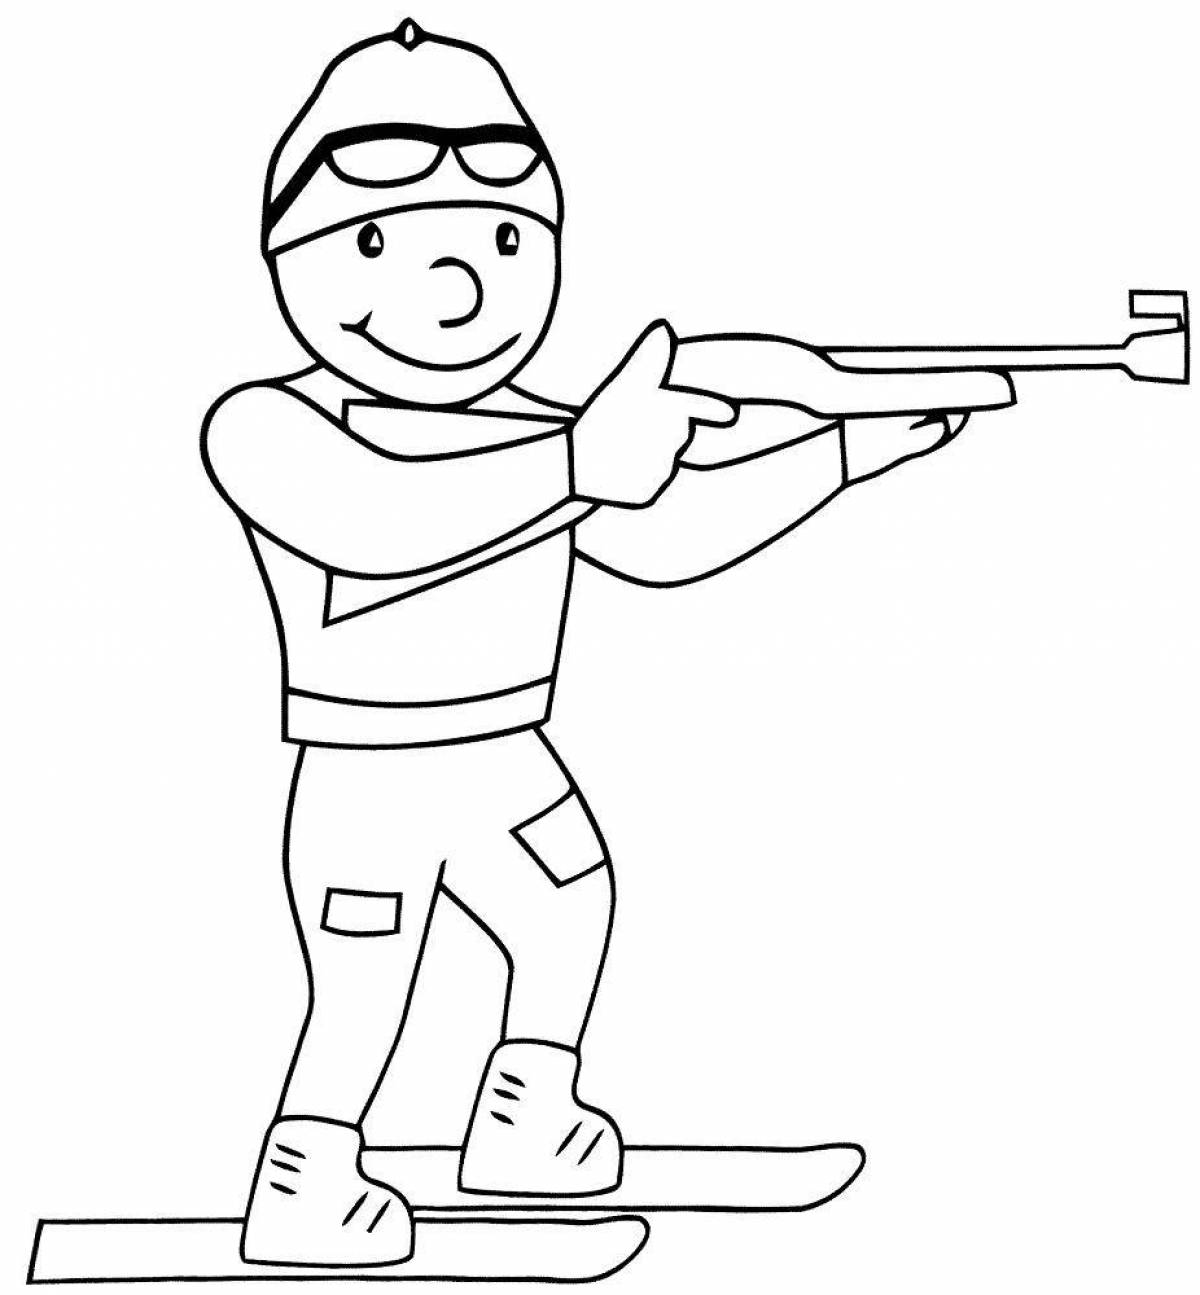 Exciting winter sports coloring page